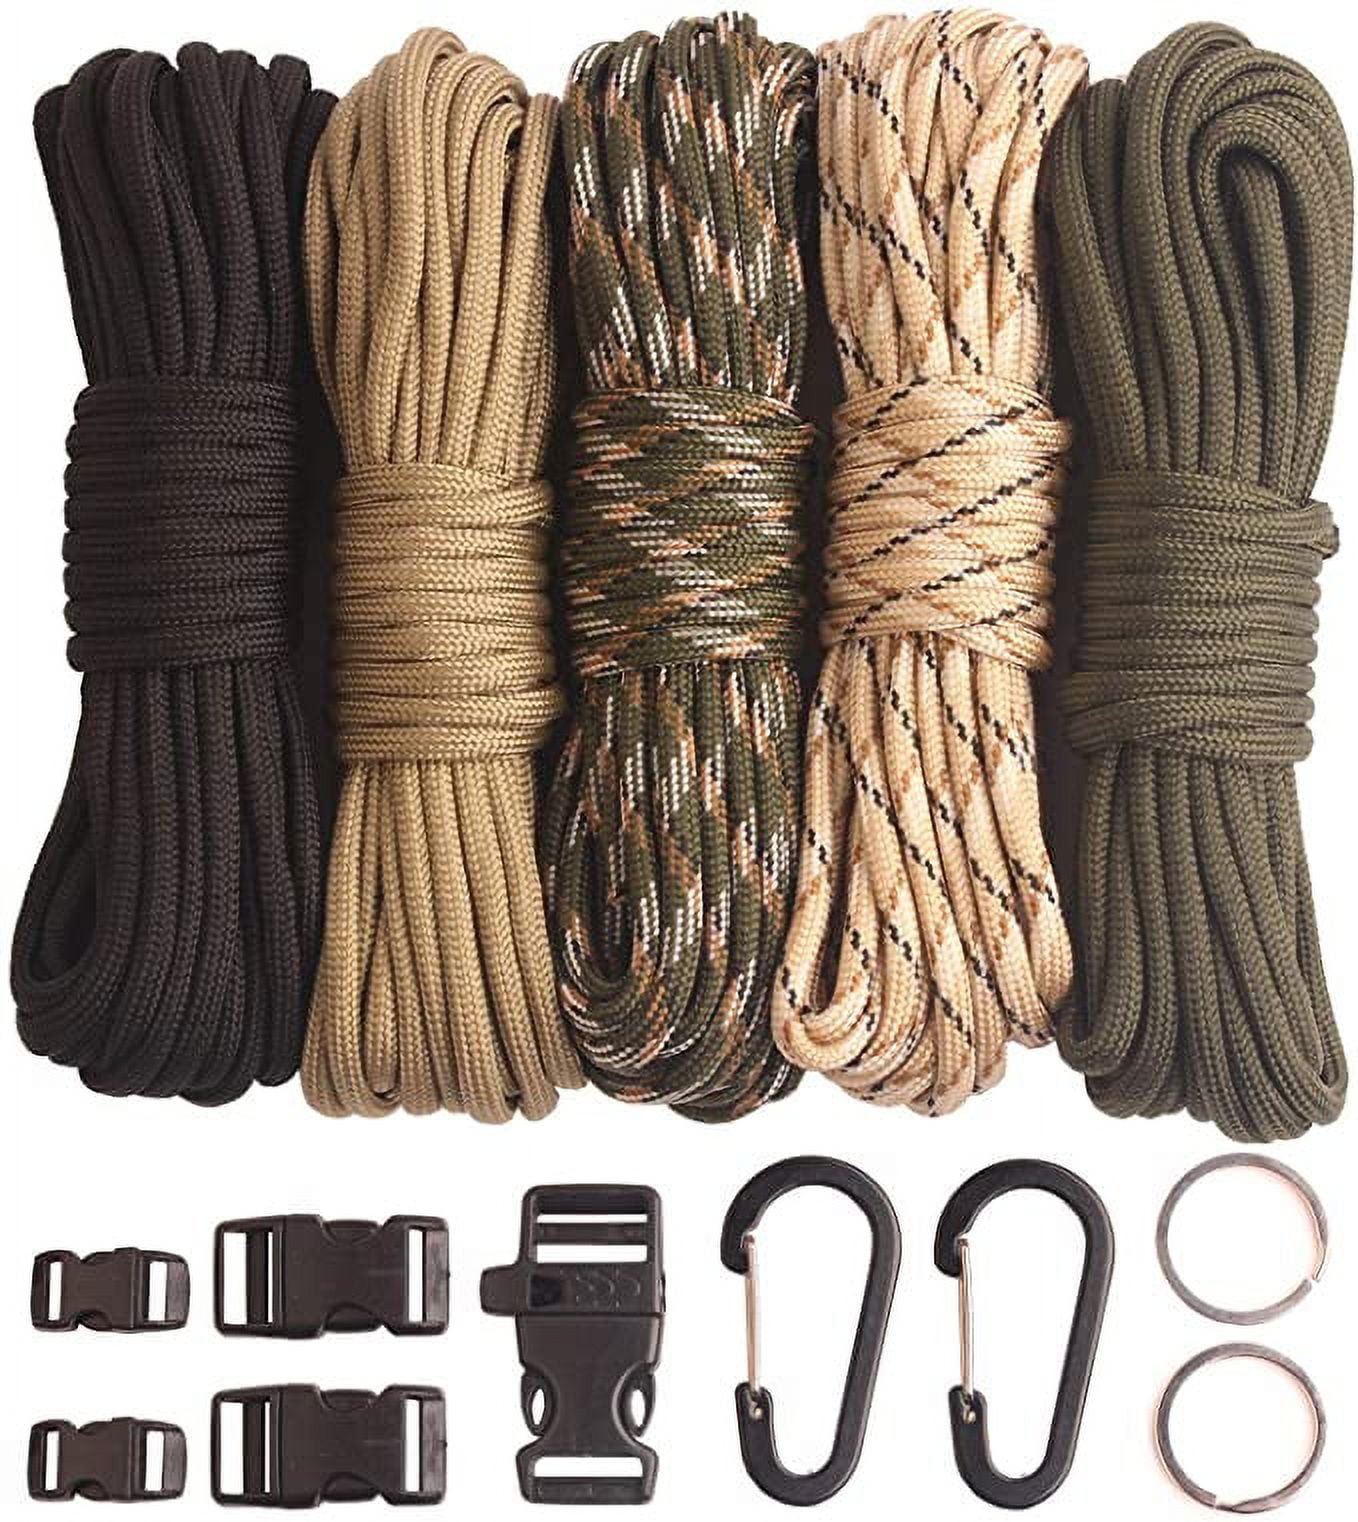  Paracord 550 Nylon Rope, Paracord Bracelets Kit, Paracord Rope,  Multifunctional Paracord Kit, Suitable for Outdoor Sports and DIY Bracelets  (36 Colors)